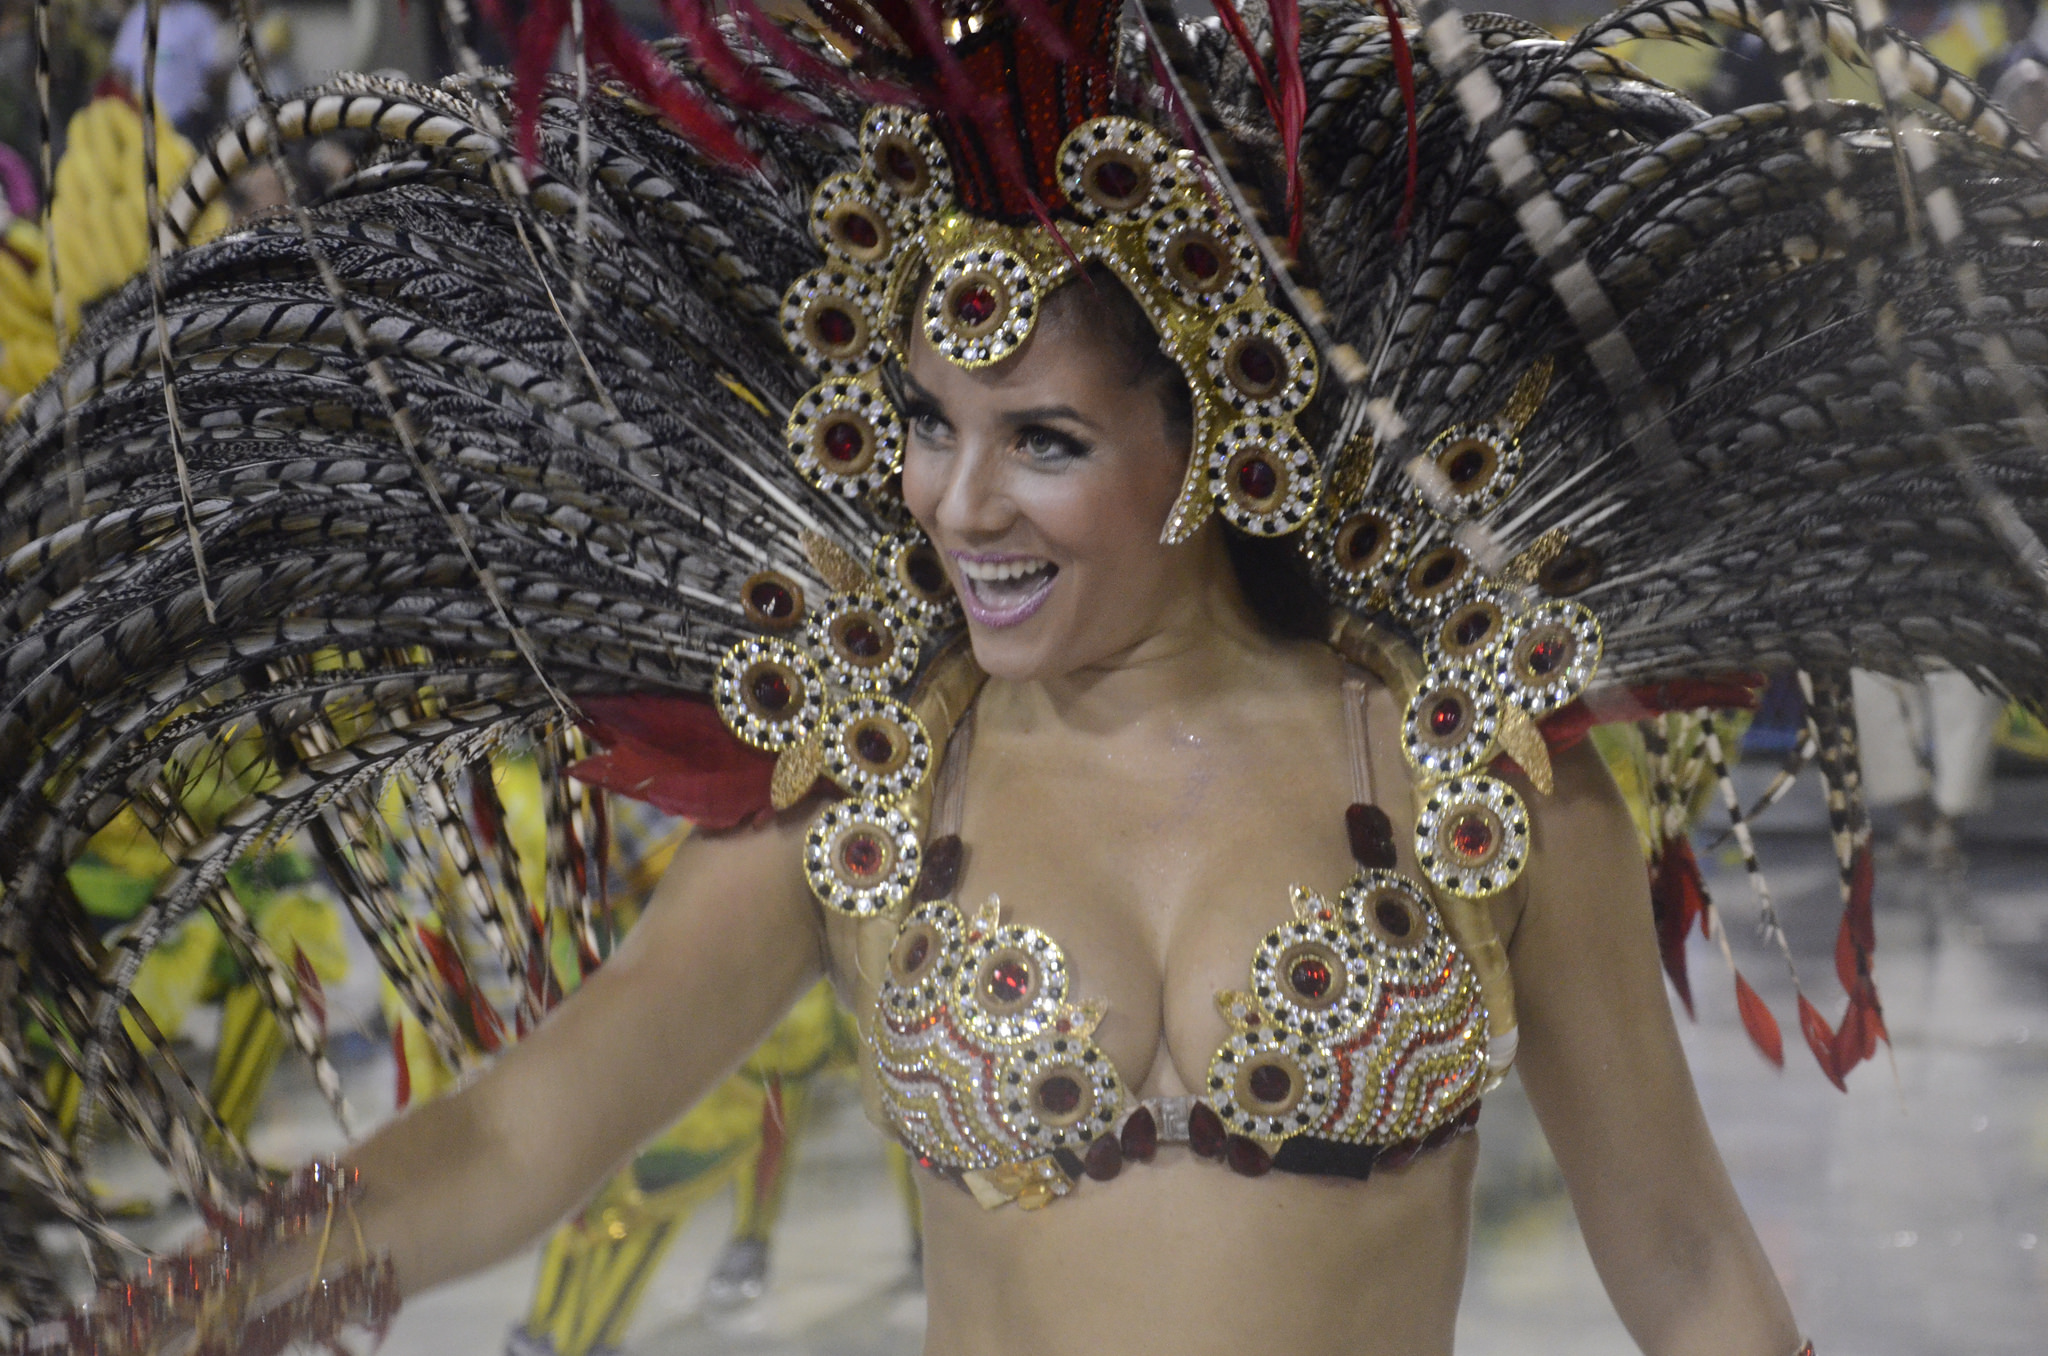 Grande Rio Will Wrap First Day of 2015 Carnival Parades